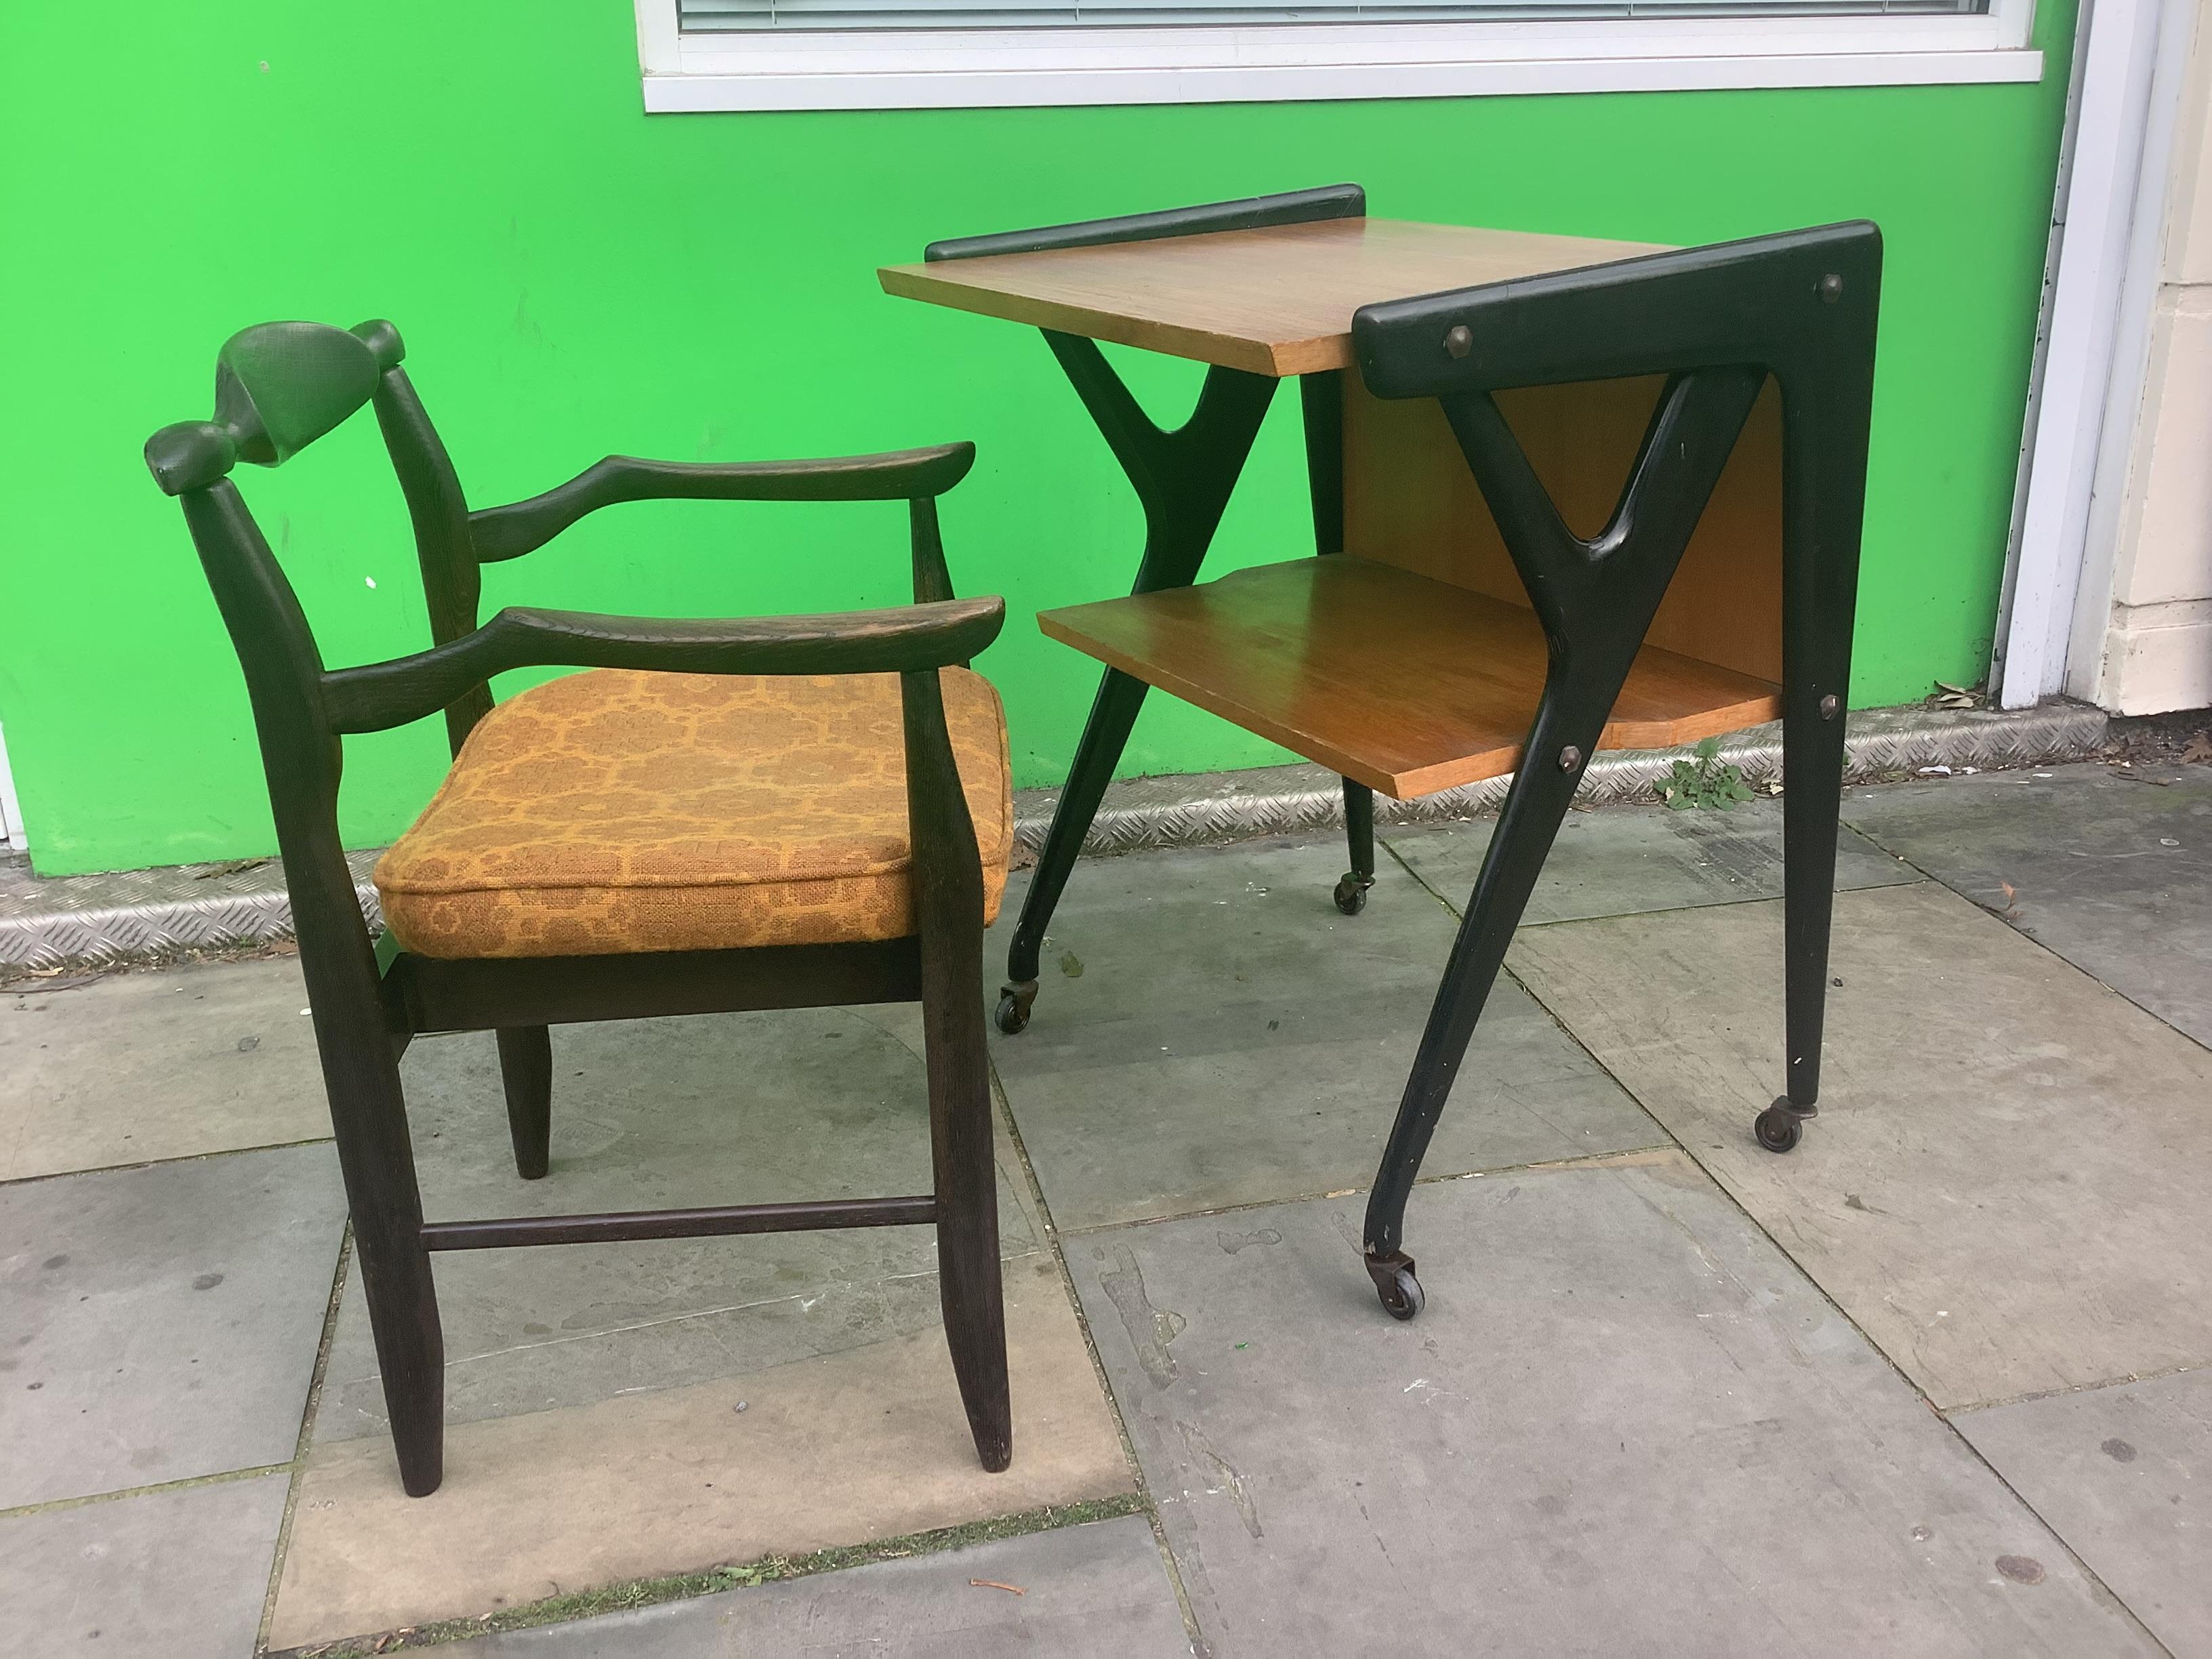 Super Stylist table originally used for vintage TV easily re used as a desk
angled black legs with polished oak surface sitting on castors make it easy 
for mobility. Cc Italian